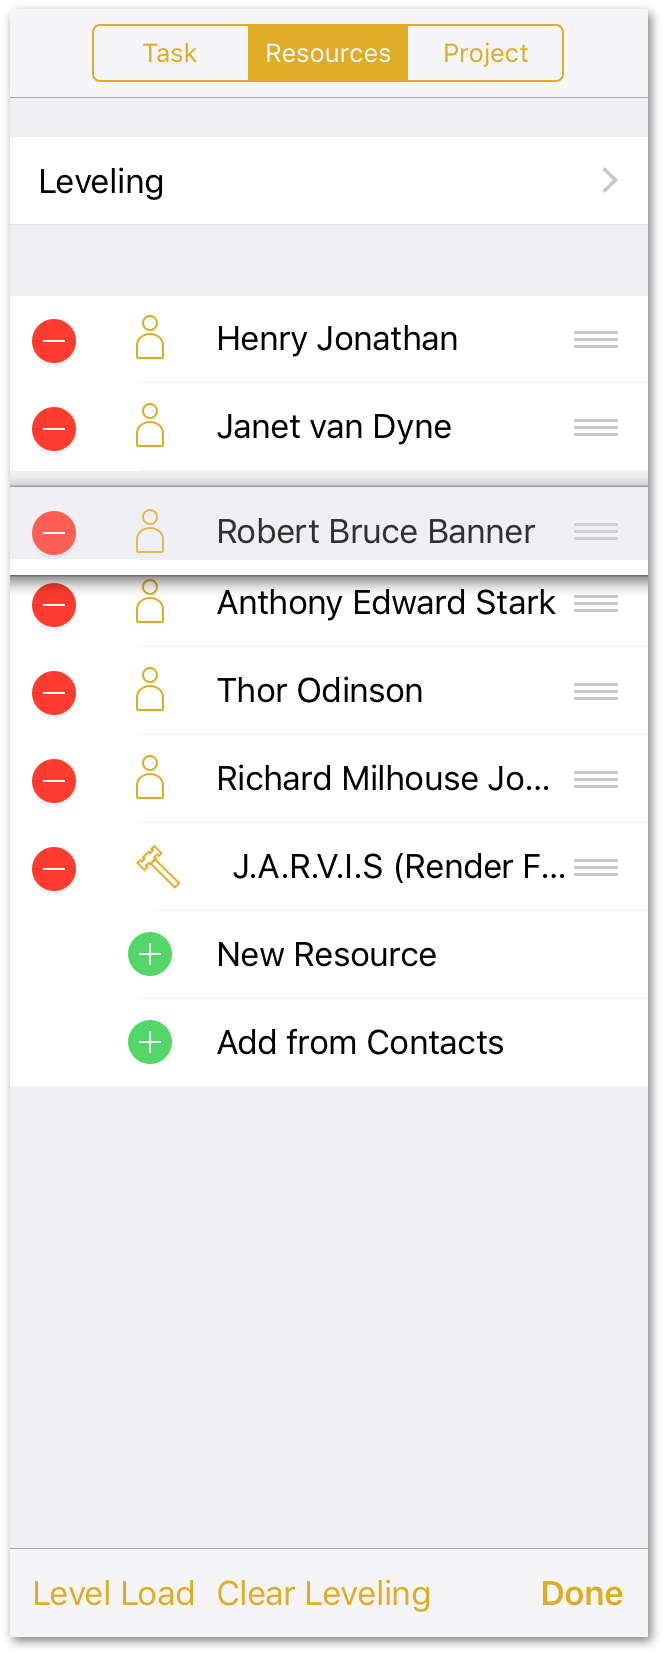 After tapping the Edit button, use the handles on the right edge of each resource to move them around in the list, or tap the delete button to remove a resource.